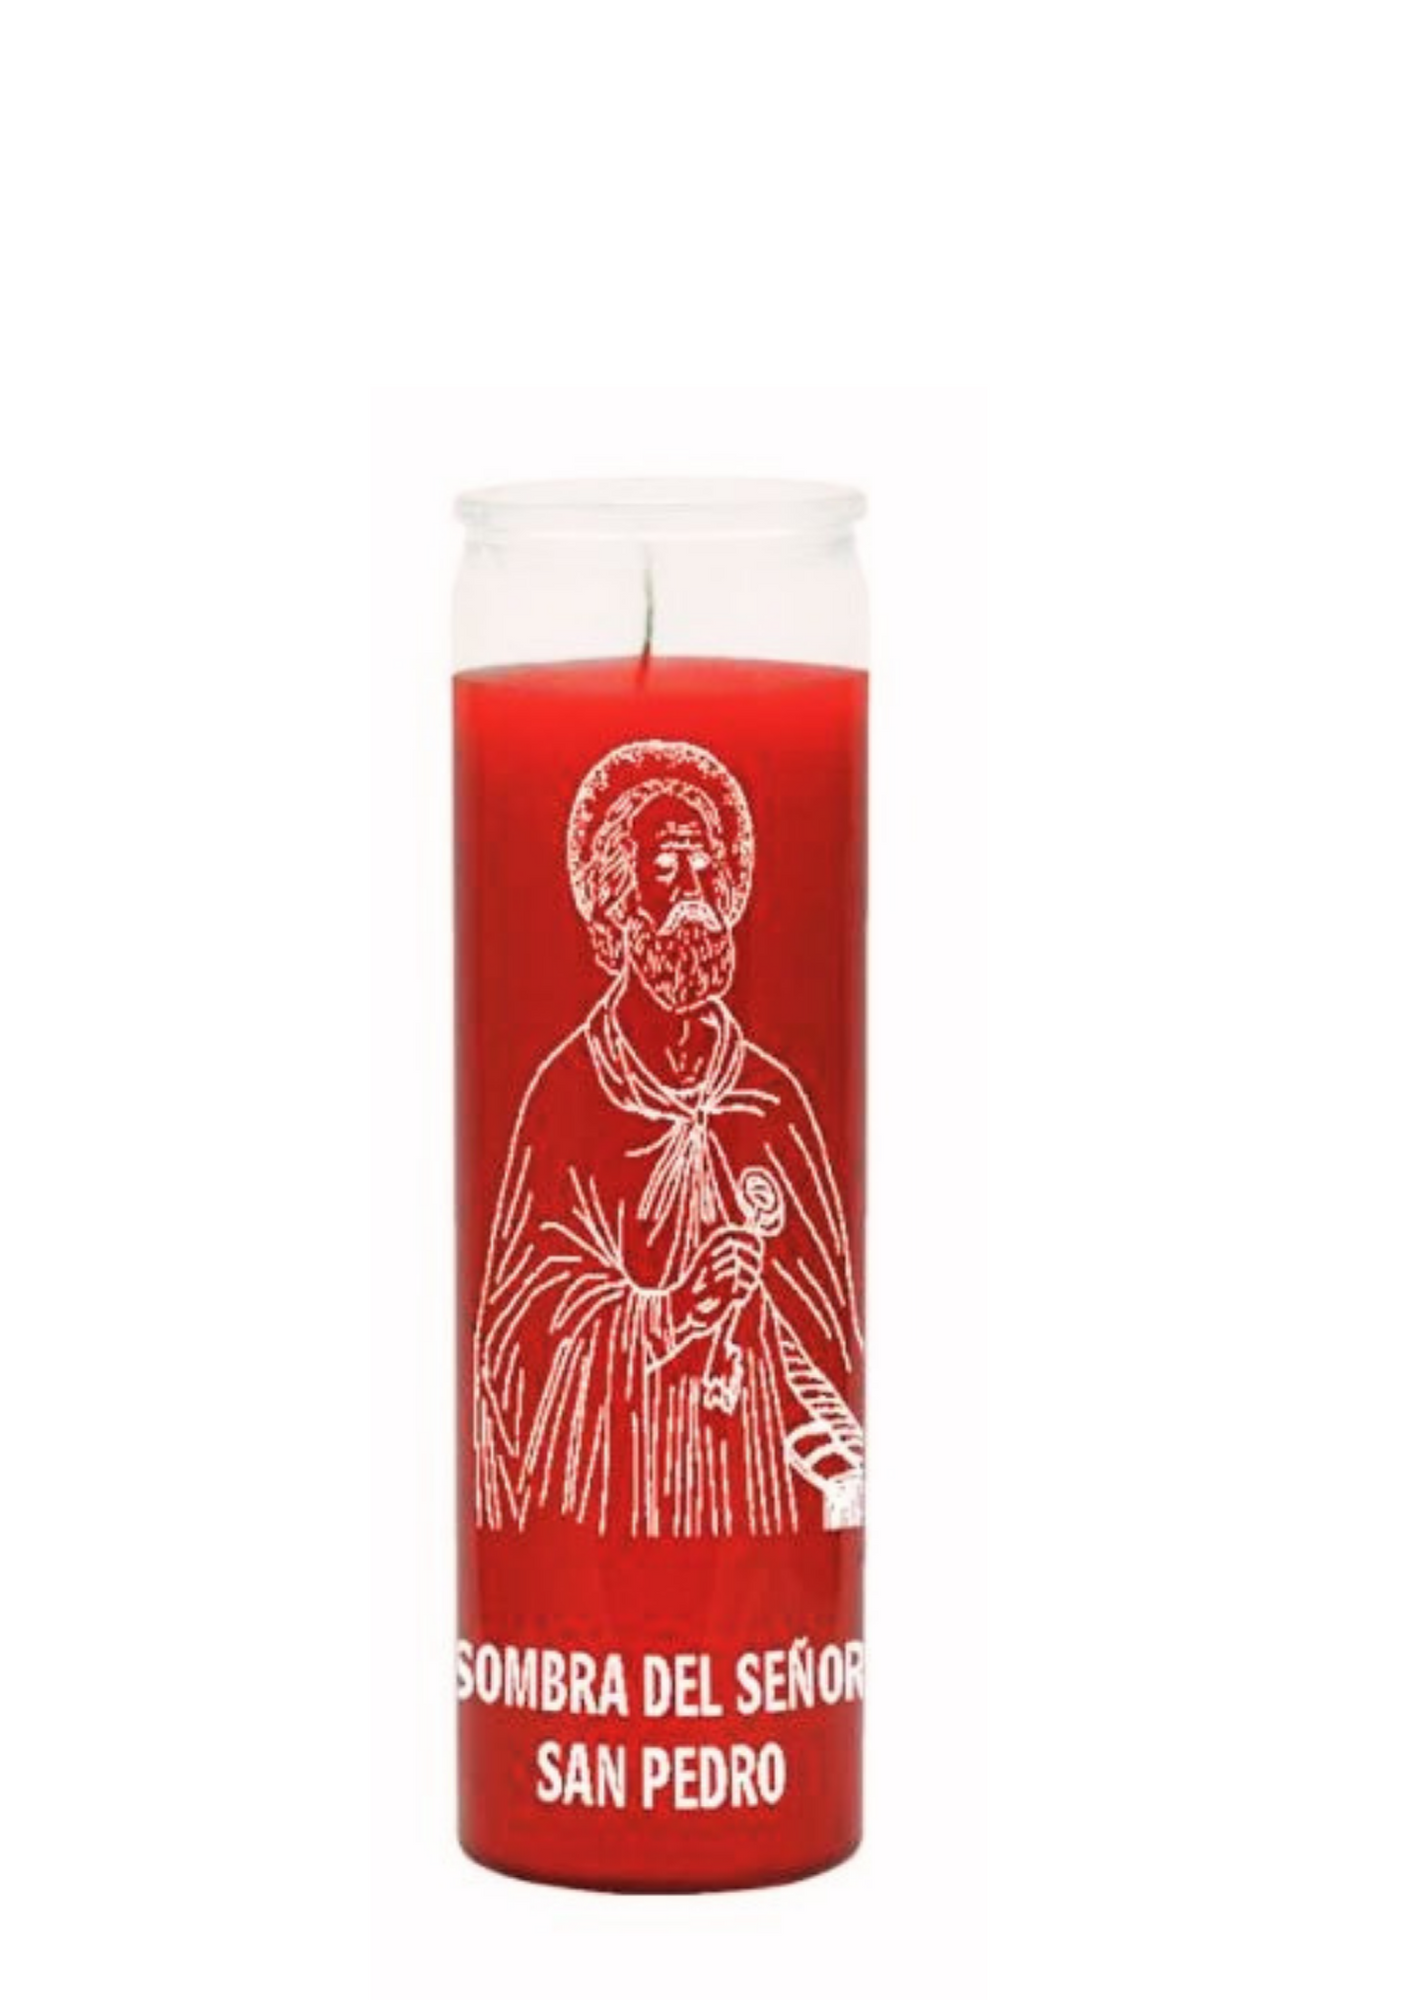 SAINT PETER SHADOW (Red ) 1 COLOR 7 DAY CANDLE